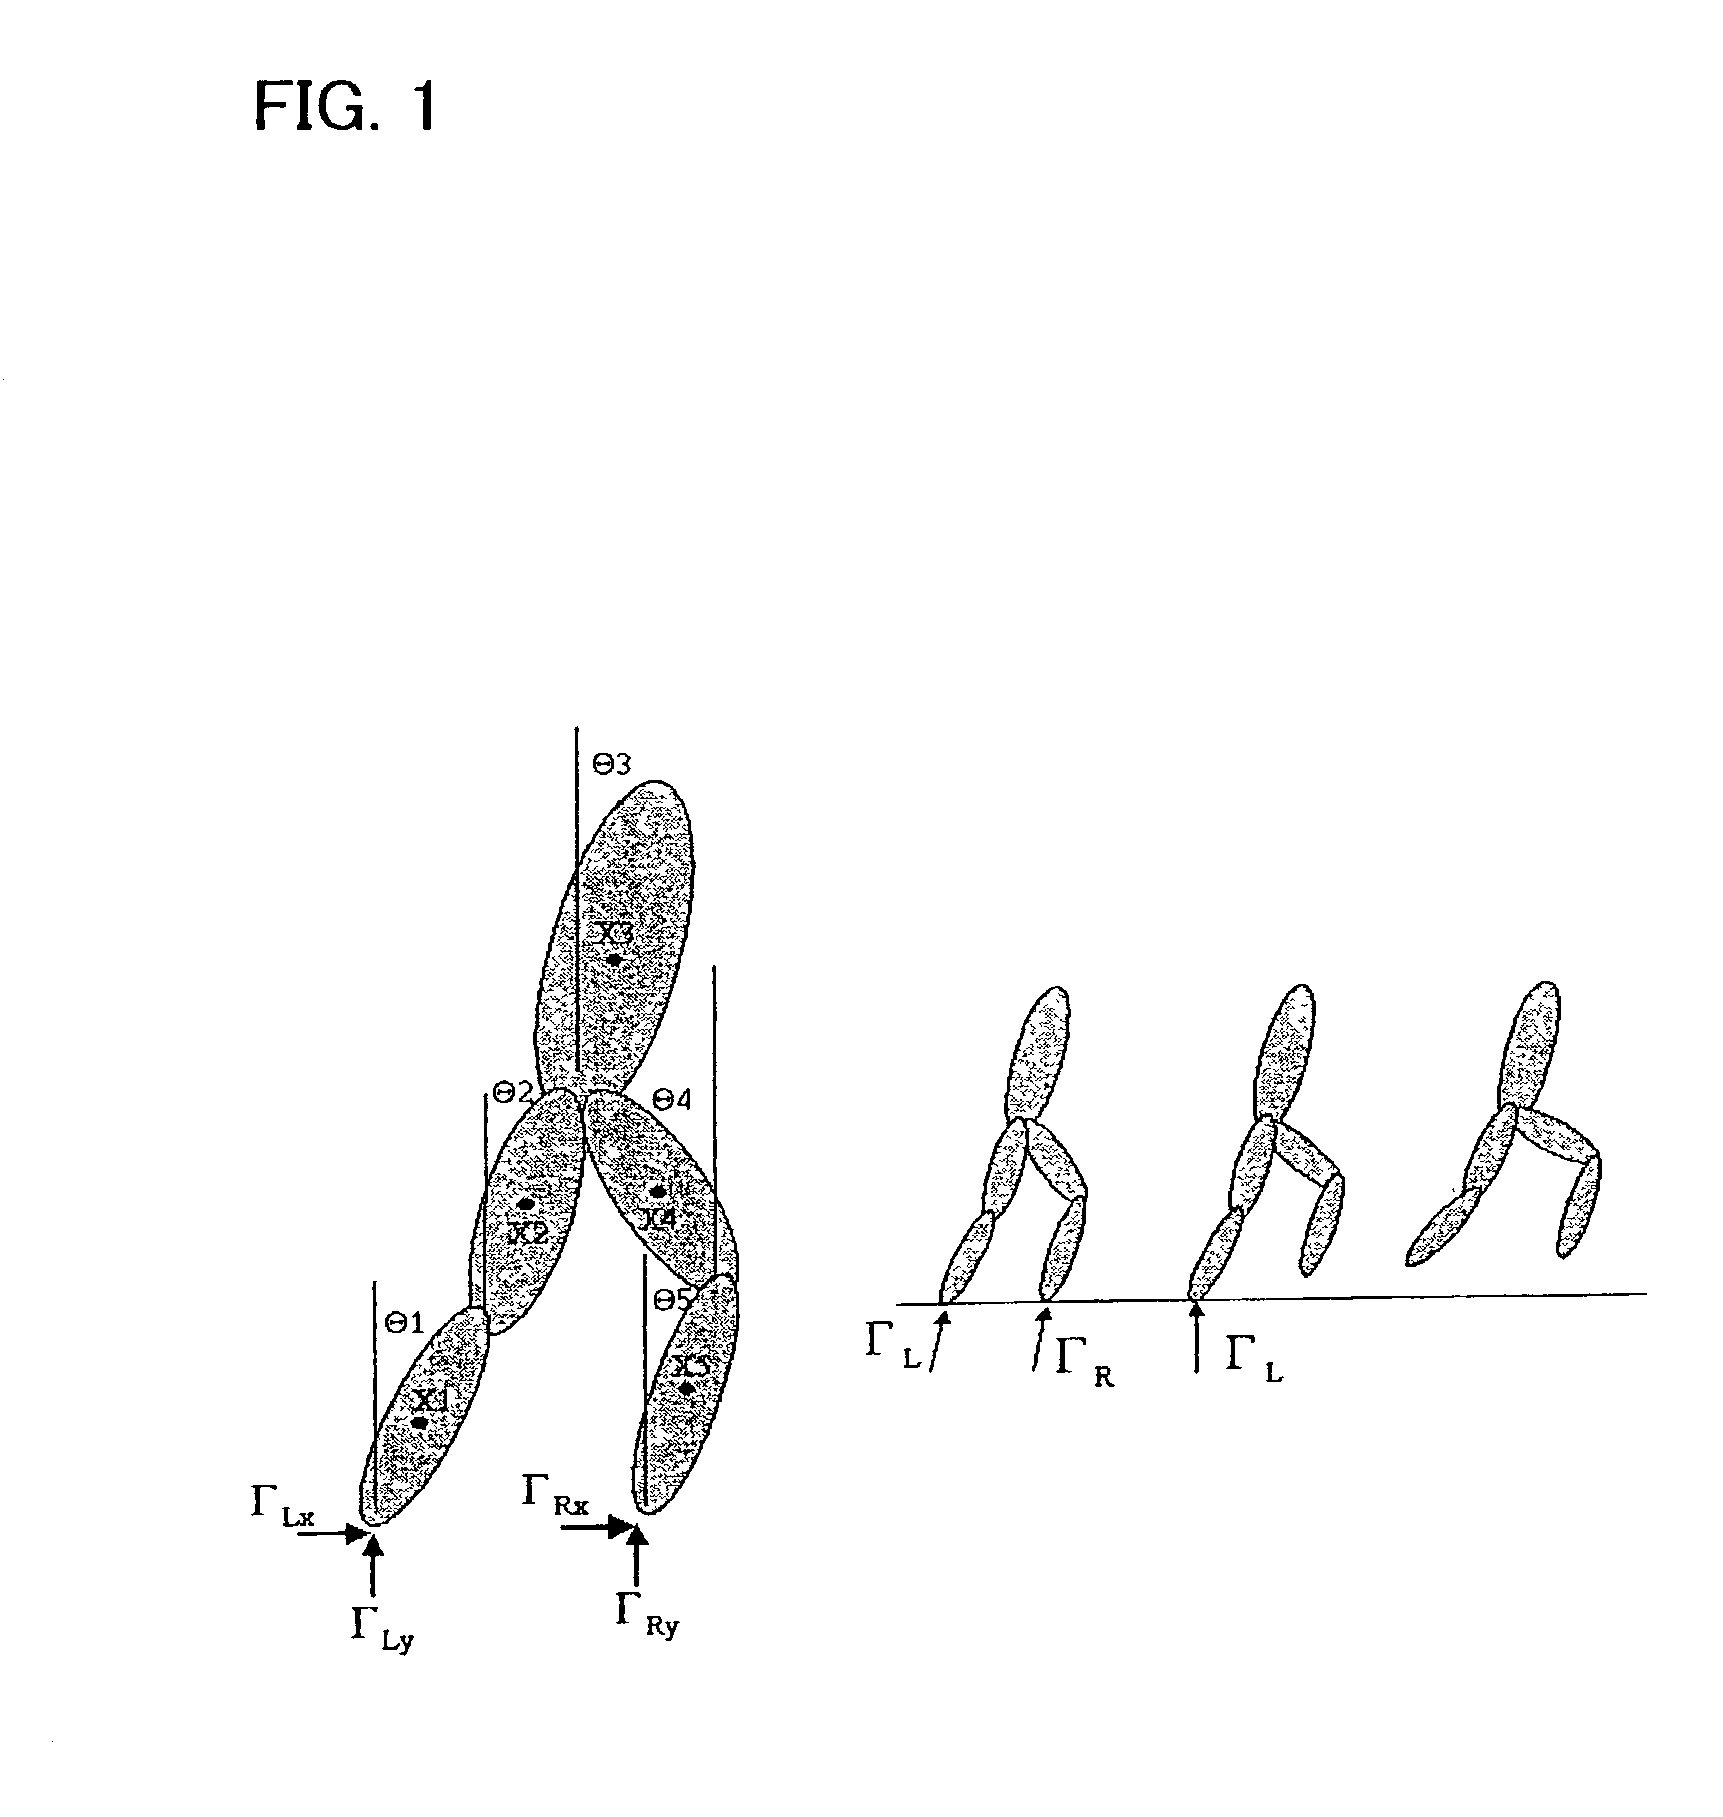 Simulation system, method and computer-readable medium for human augmentation devices